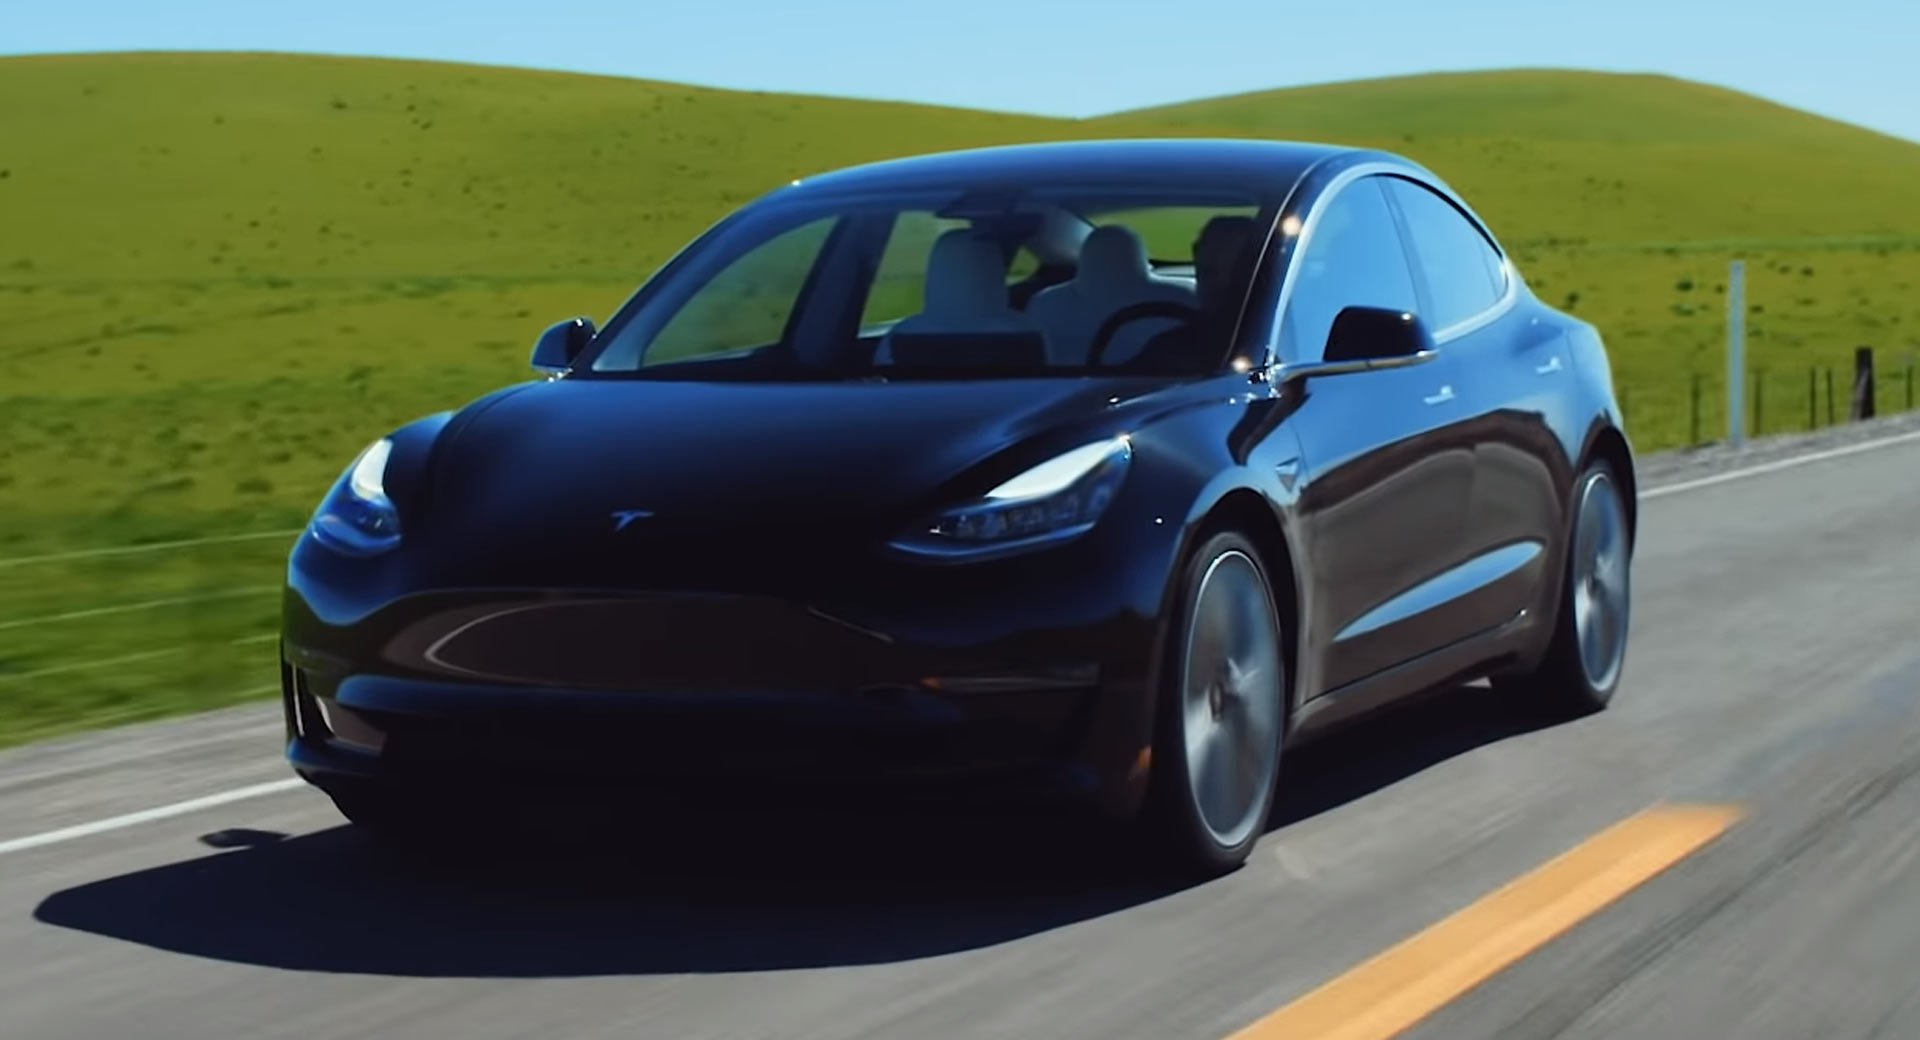 Top Gear Enjoys A Day In California Experiencing All Things Tesla